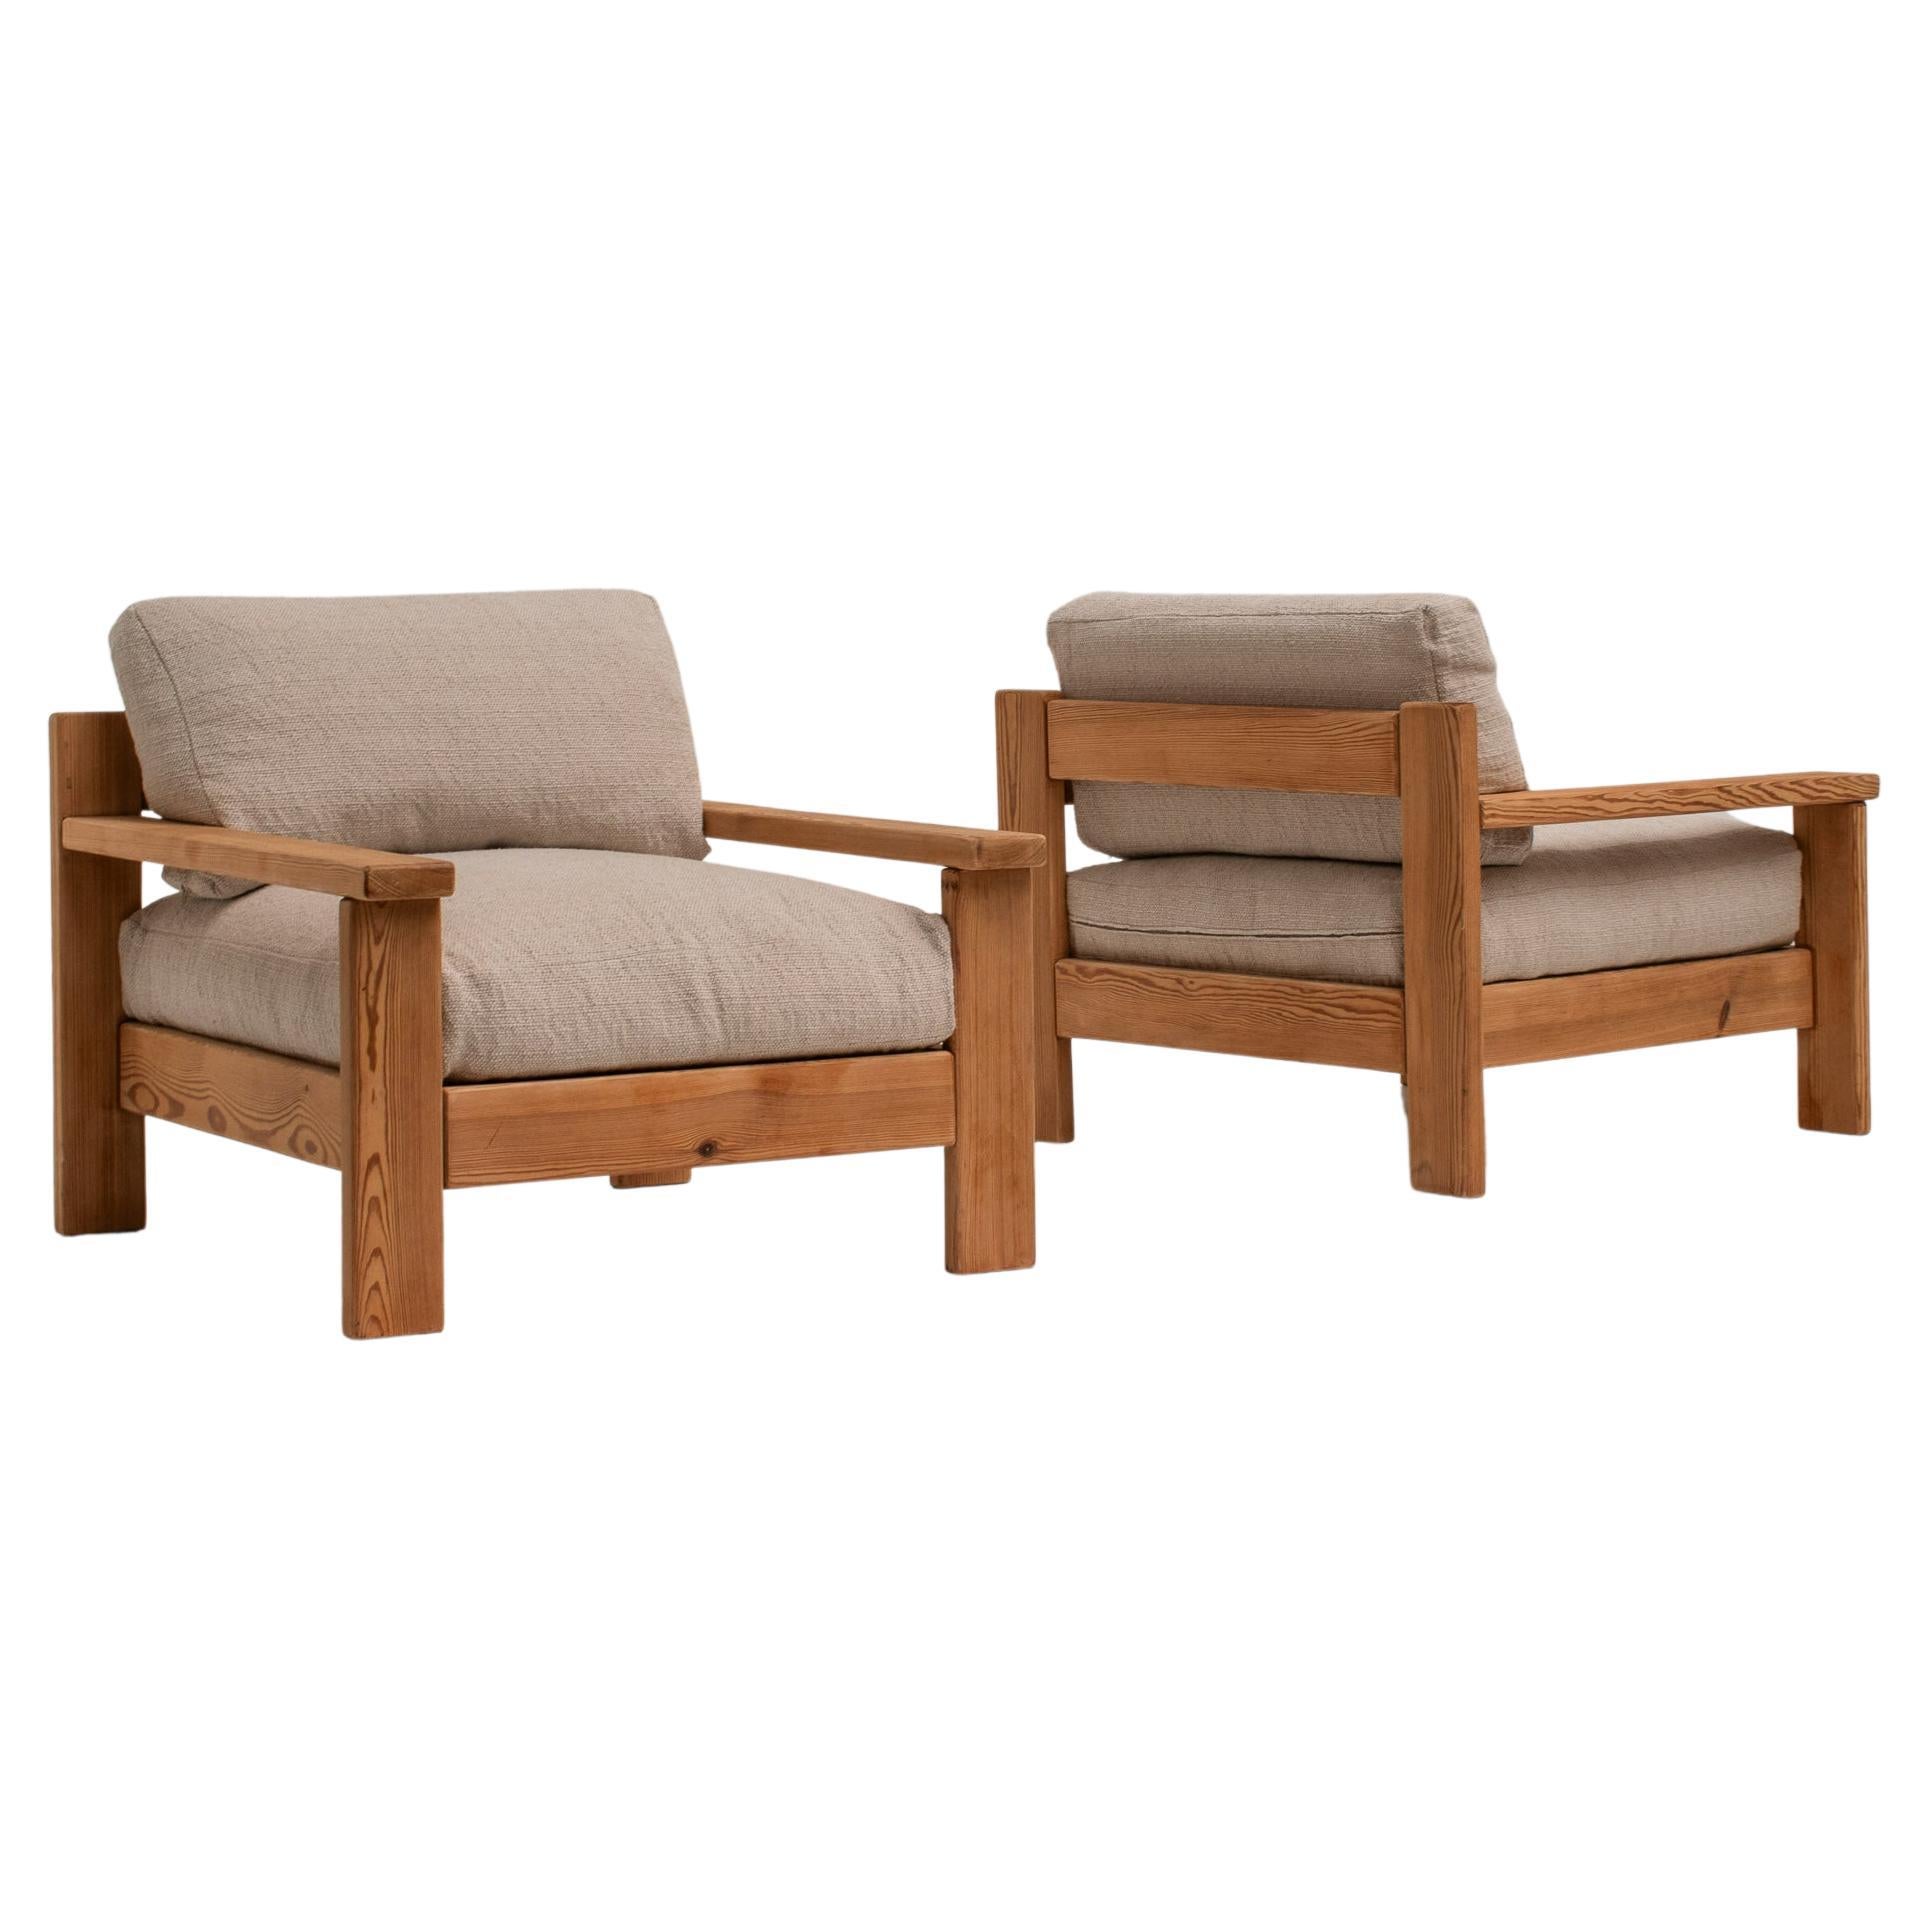 Minimalistic Mid-century Modern Lounge Chairs in Natural Wood, Italy, 1970s For Sale